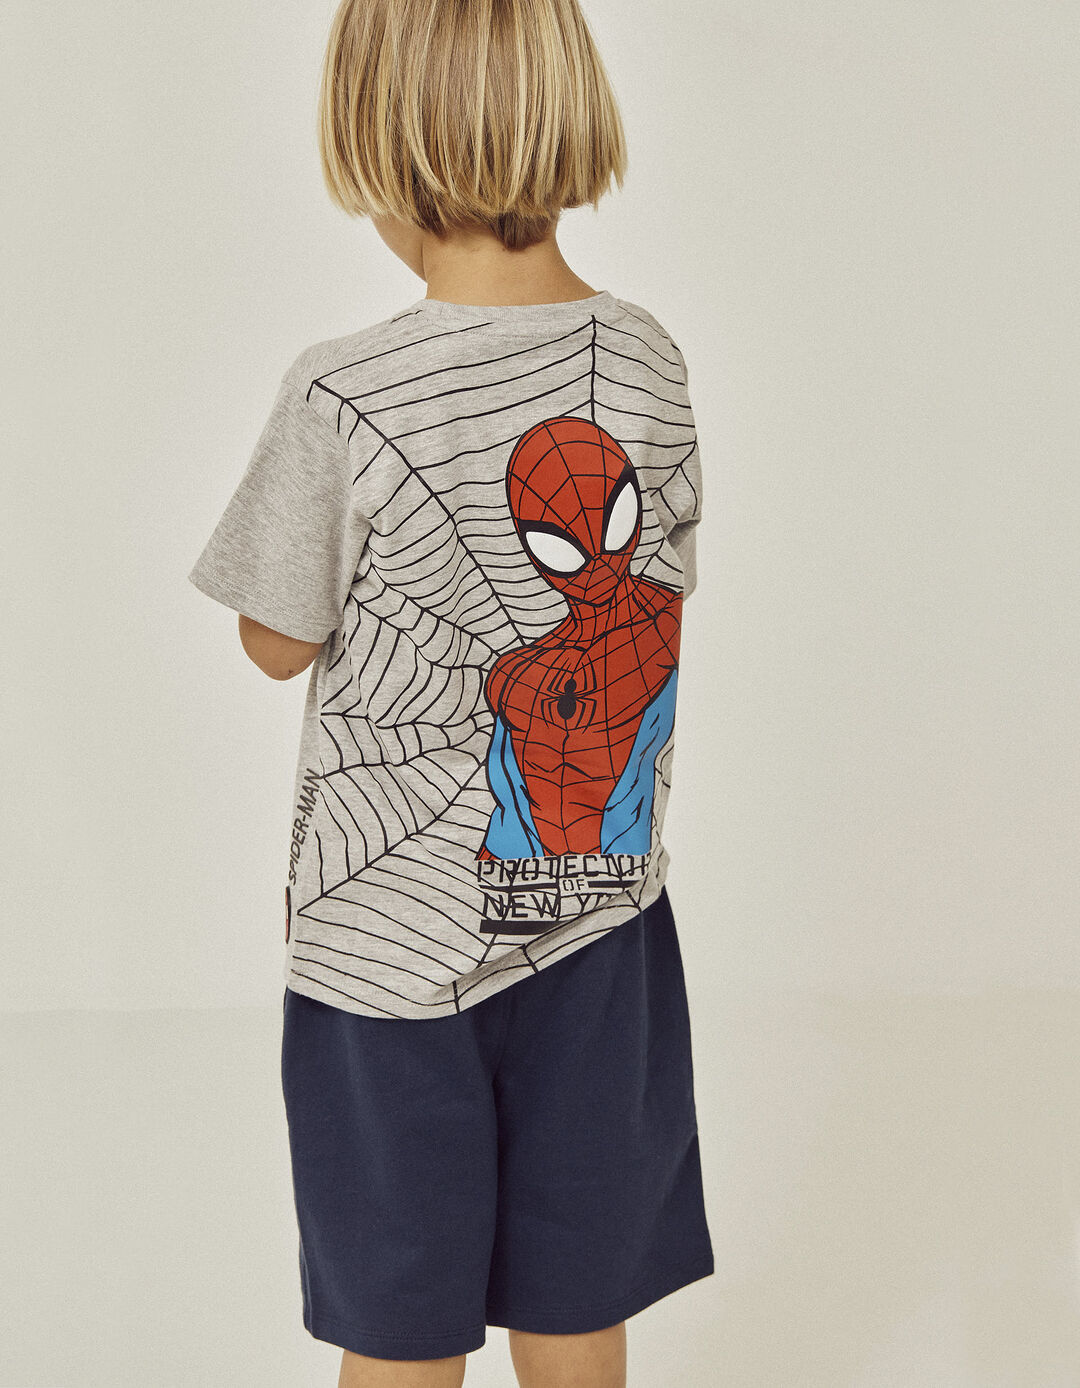 Cotton T-shirt for Boys 'Spider-Man', Grey